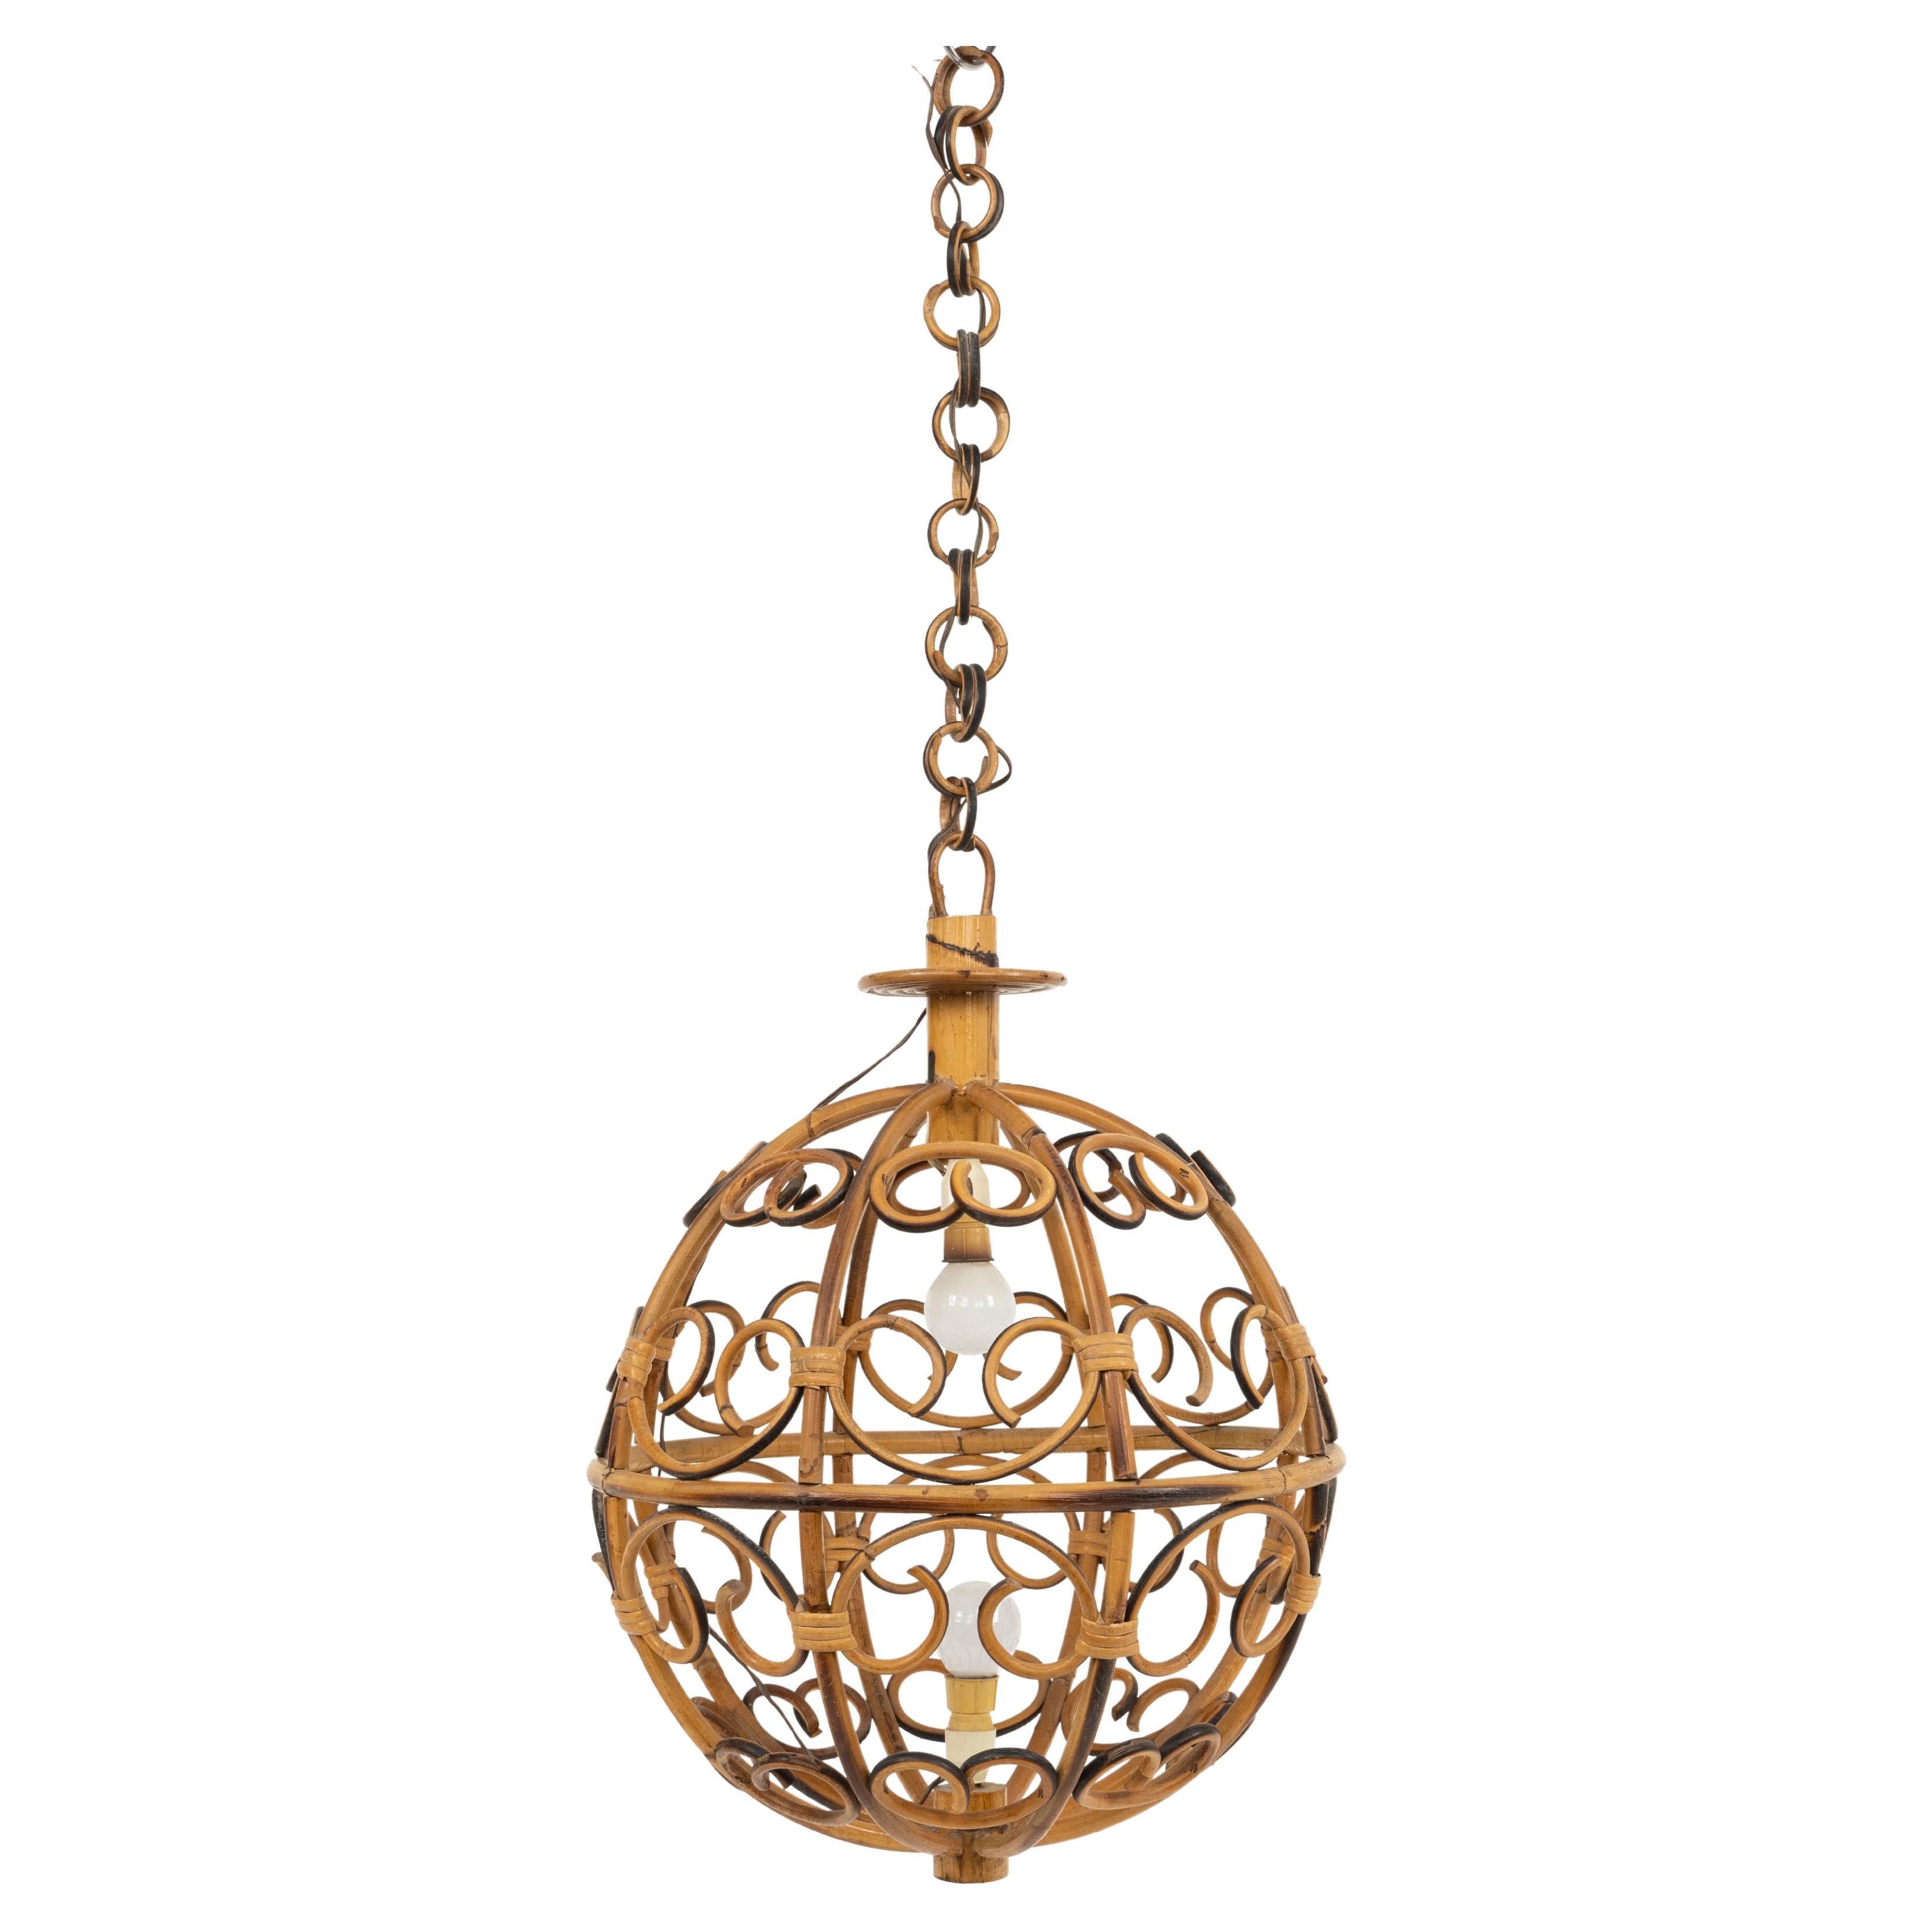 Midcentury Globe Chandelier in Rattan and Bamboo, Italy 1960s For Sale